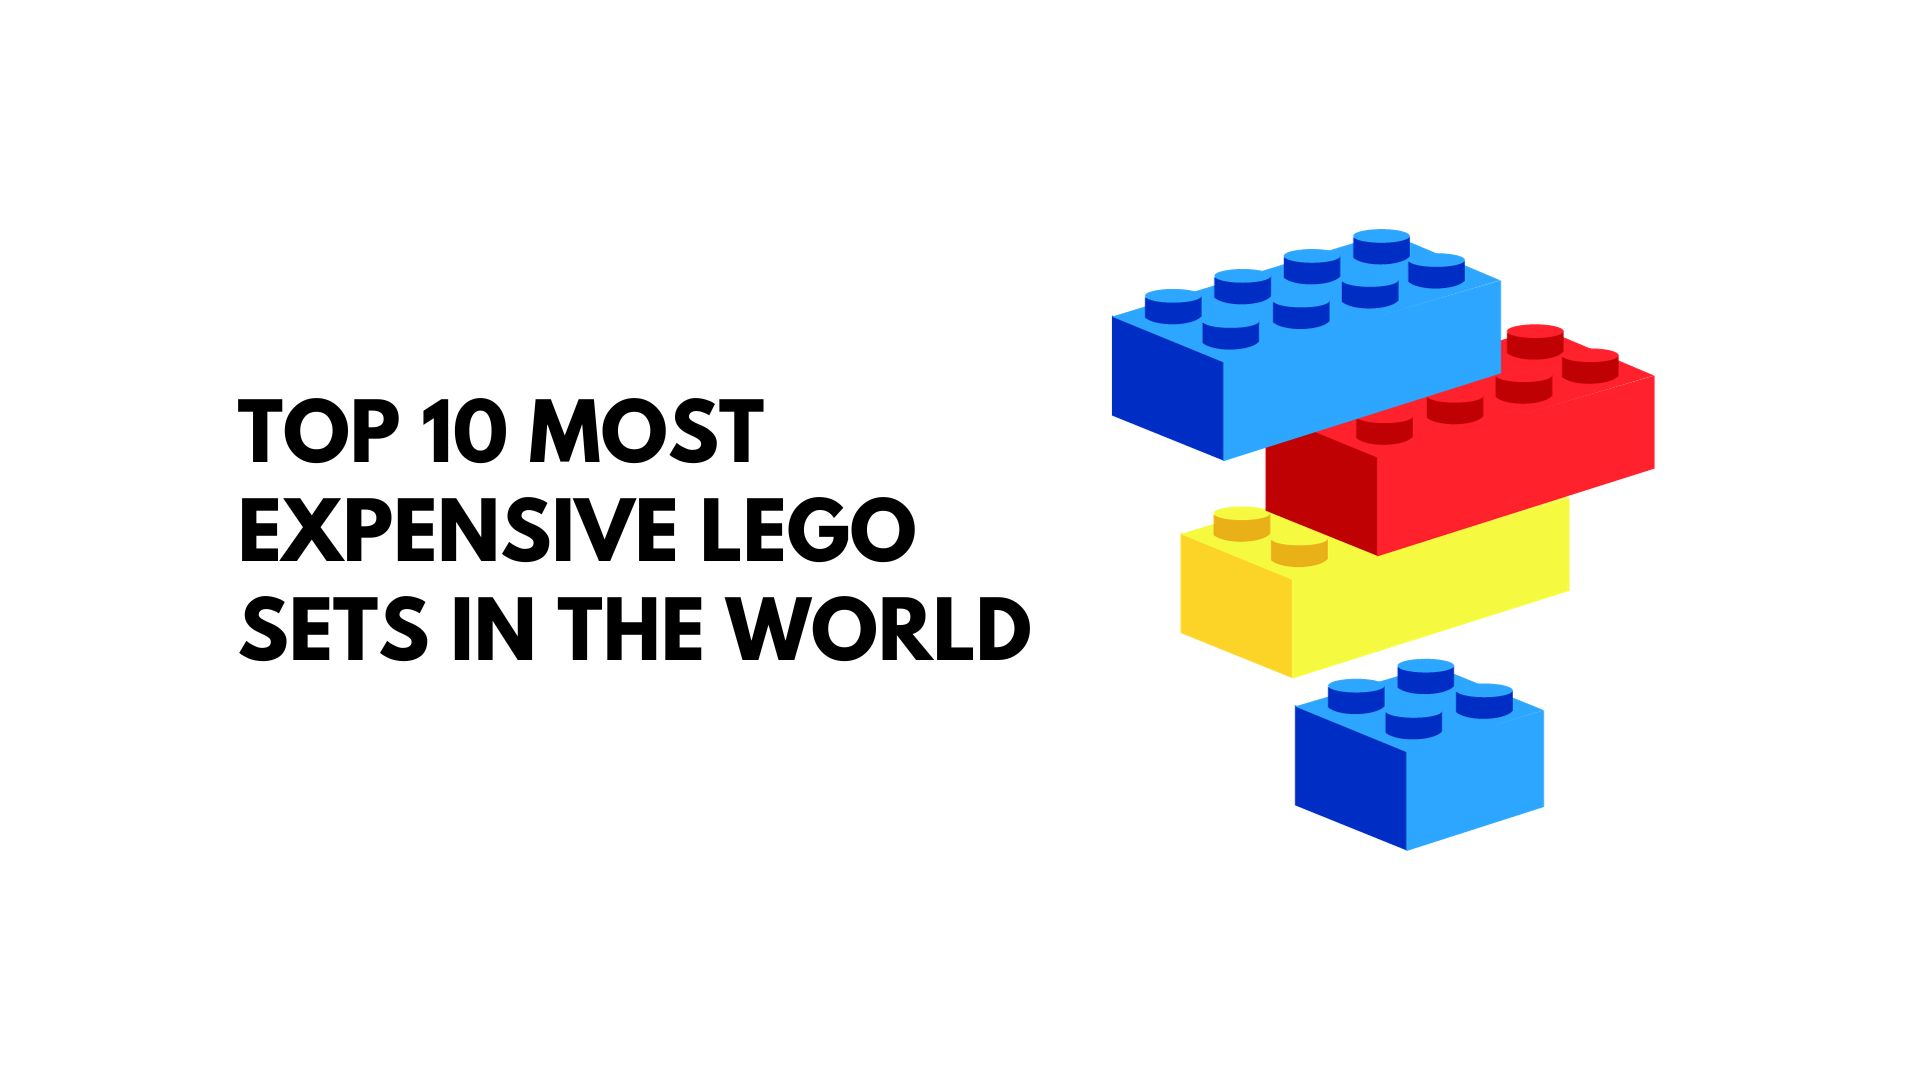 Top 10 Most Expensive Lego Sets In The World